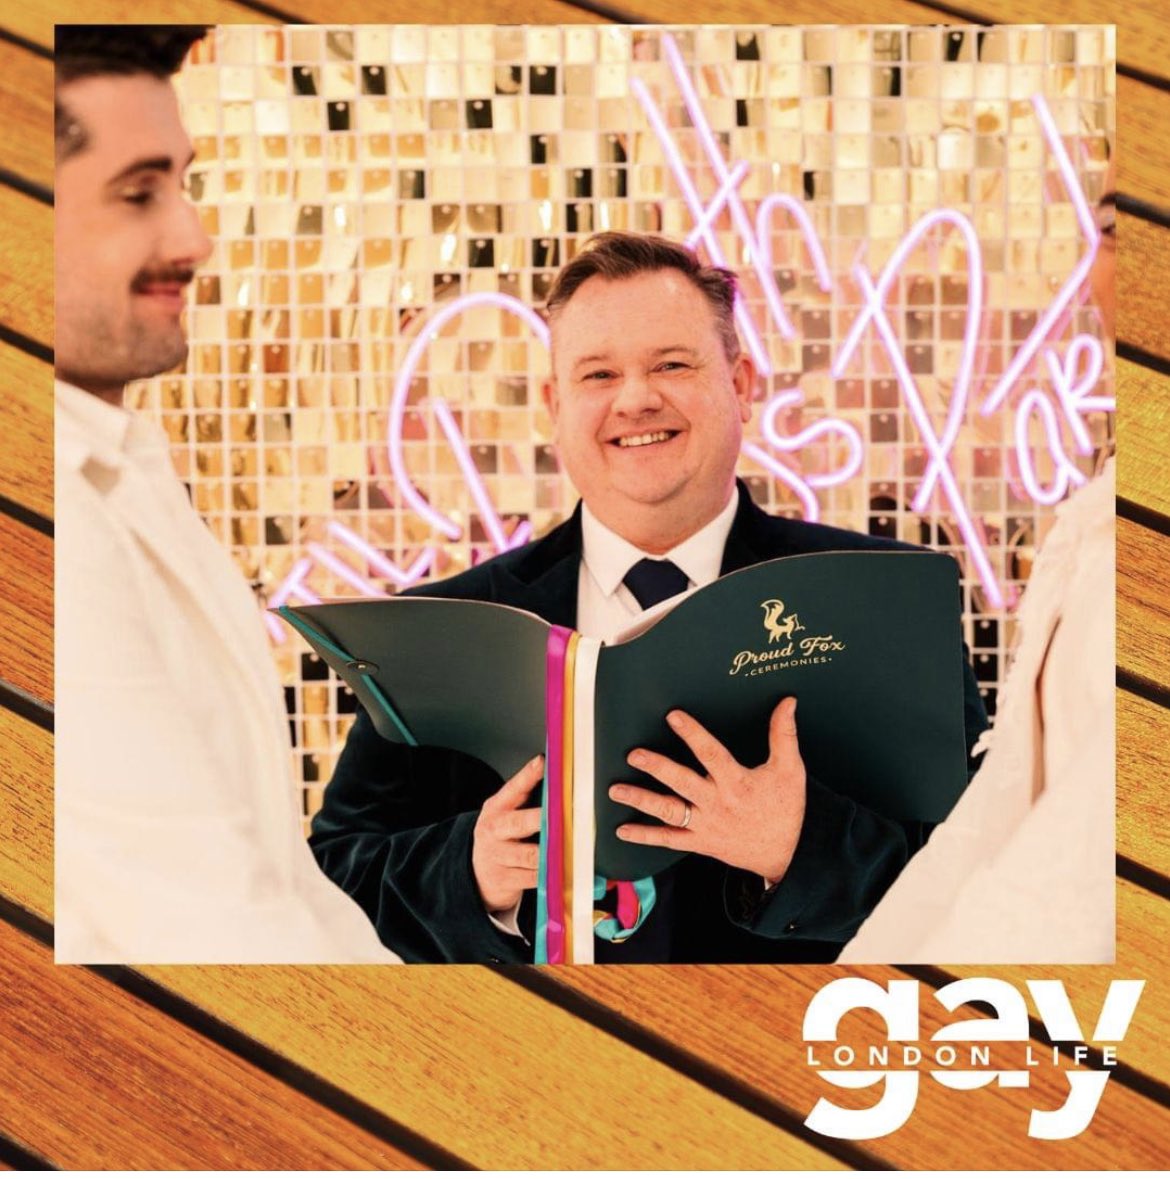 🥂 Celebrate with Proud Fox Ceremonies! #DragYouUpTheAisle with Maria Hurtz or with Martin #TheFoxyCelebrant @ProudFoxCms #Weddings #Funerals #Celebrant #DragQueenCelebrant 

➡️ Find out more: bit.ly/3ea1ZBs